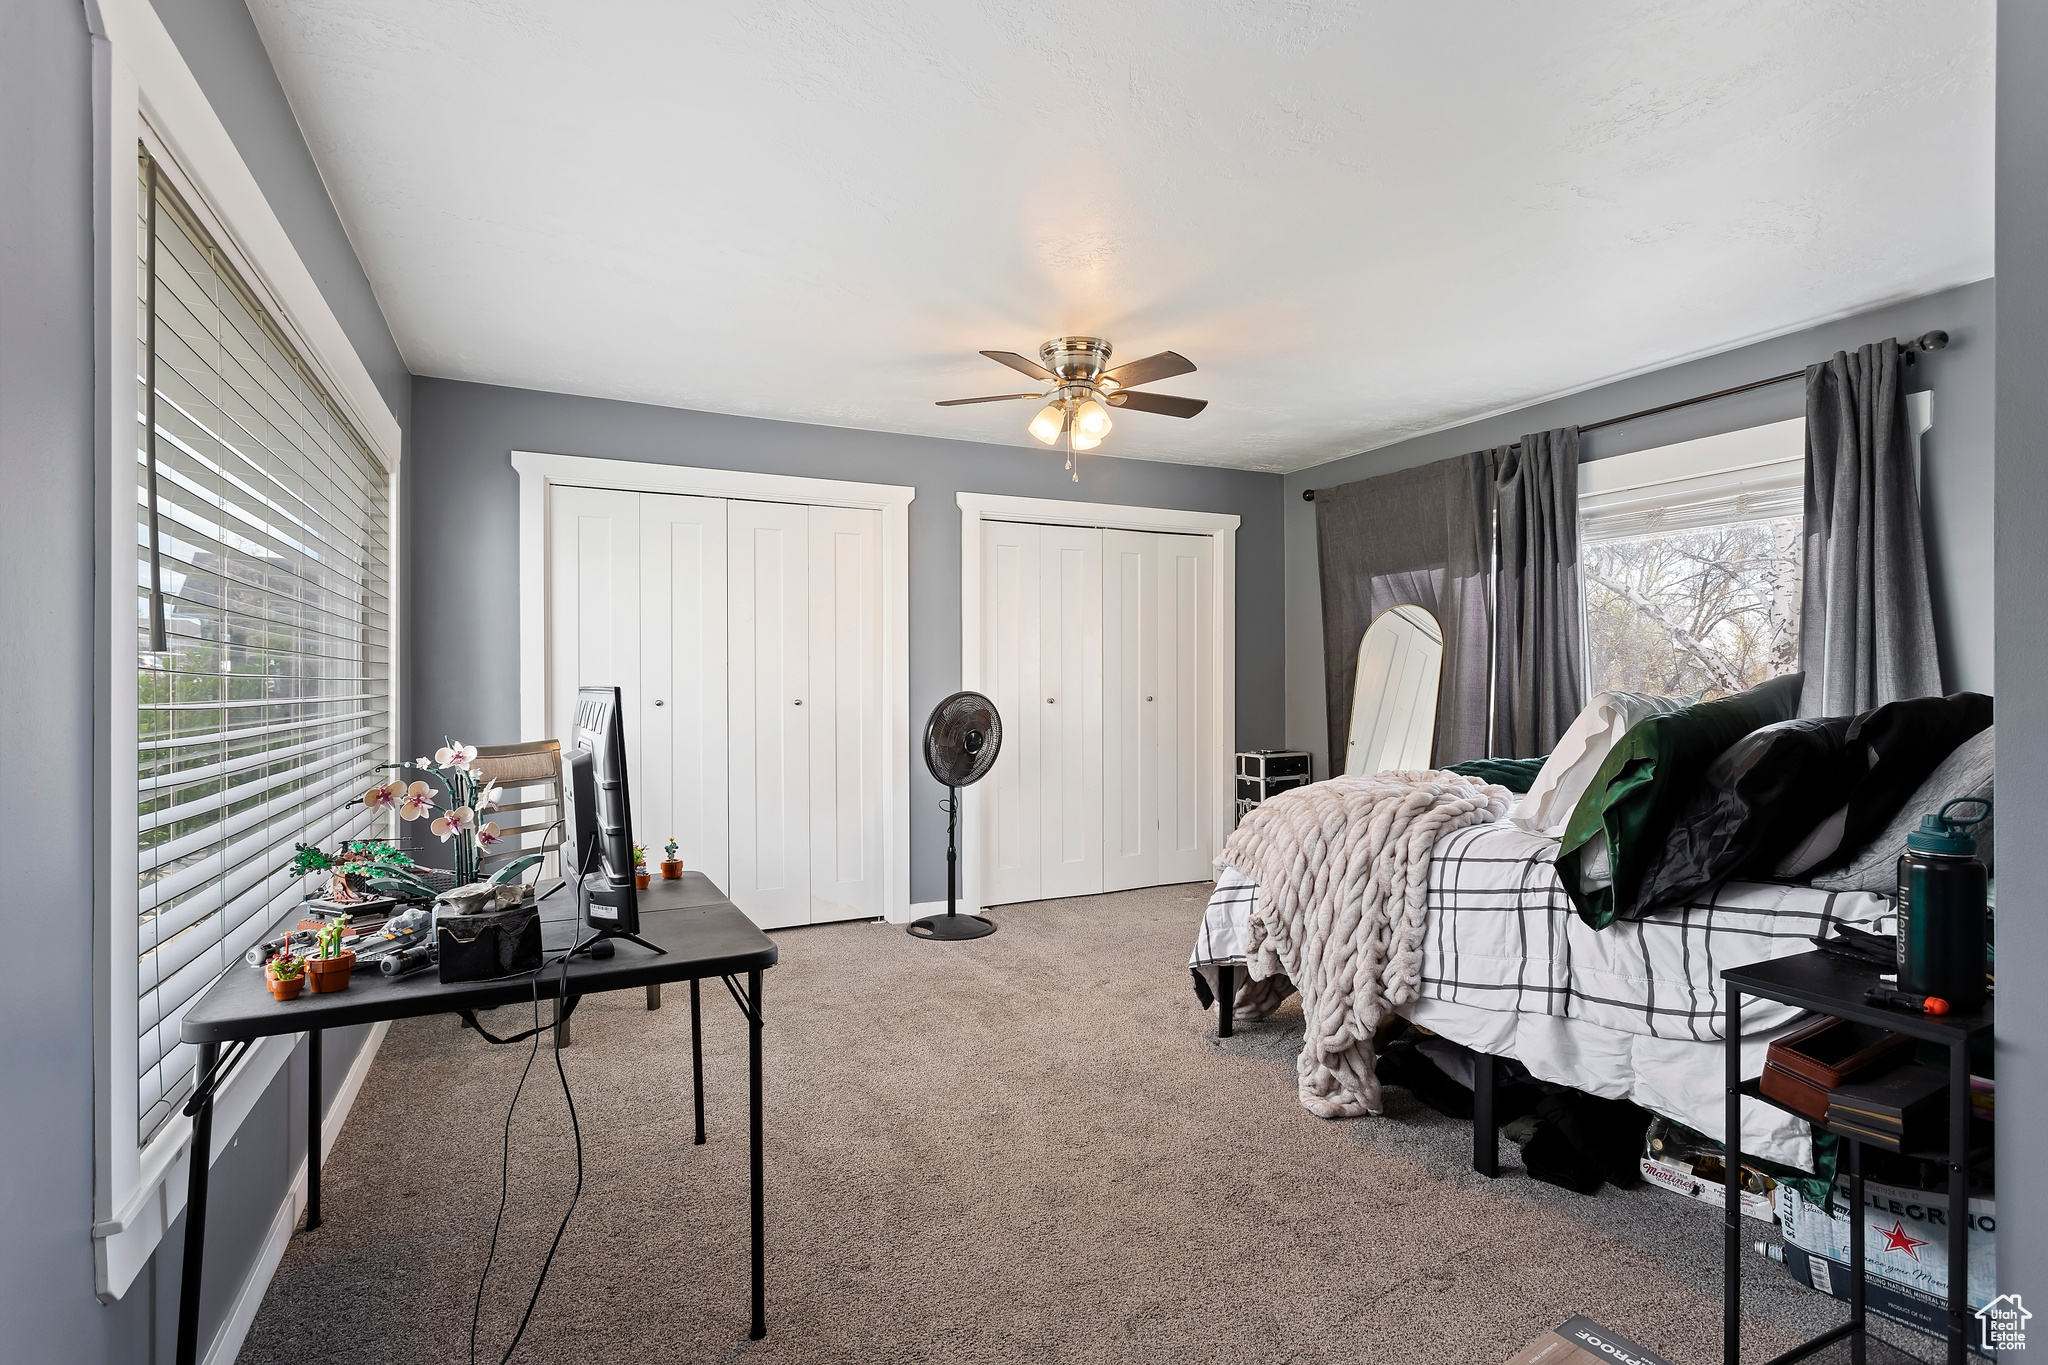 Bedroom featuring ceiling fan, dark carpet, and two closets